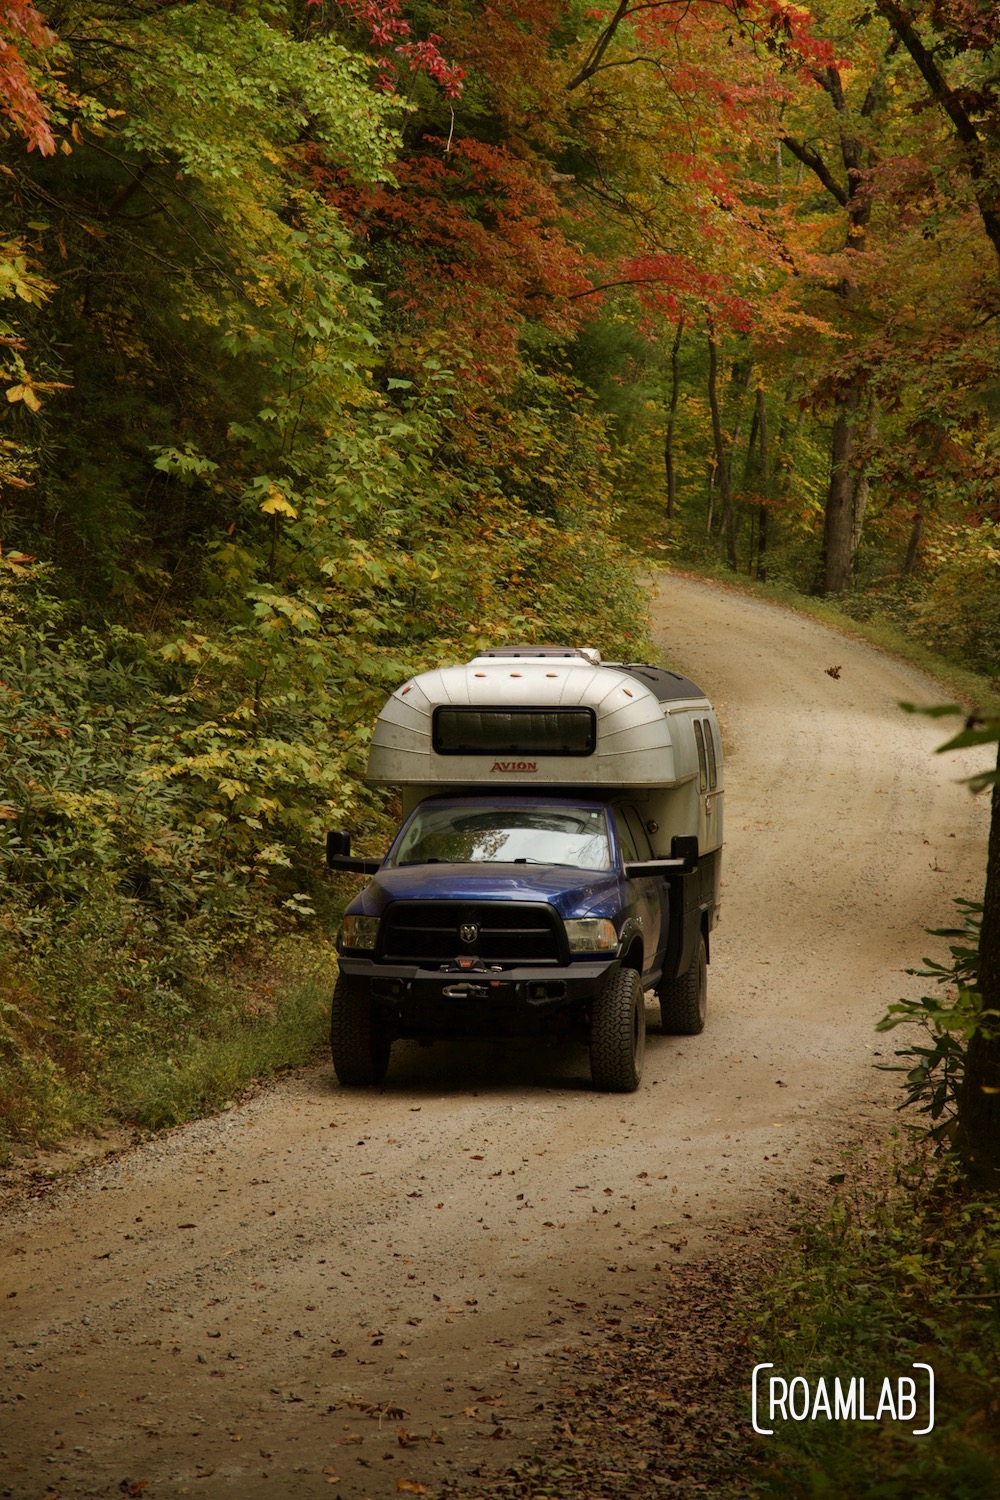 1970 Avion C11 truck camper winding along the dirt Old North Carolina 105 in Linville Gorge Wilderness Area.